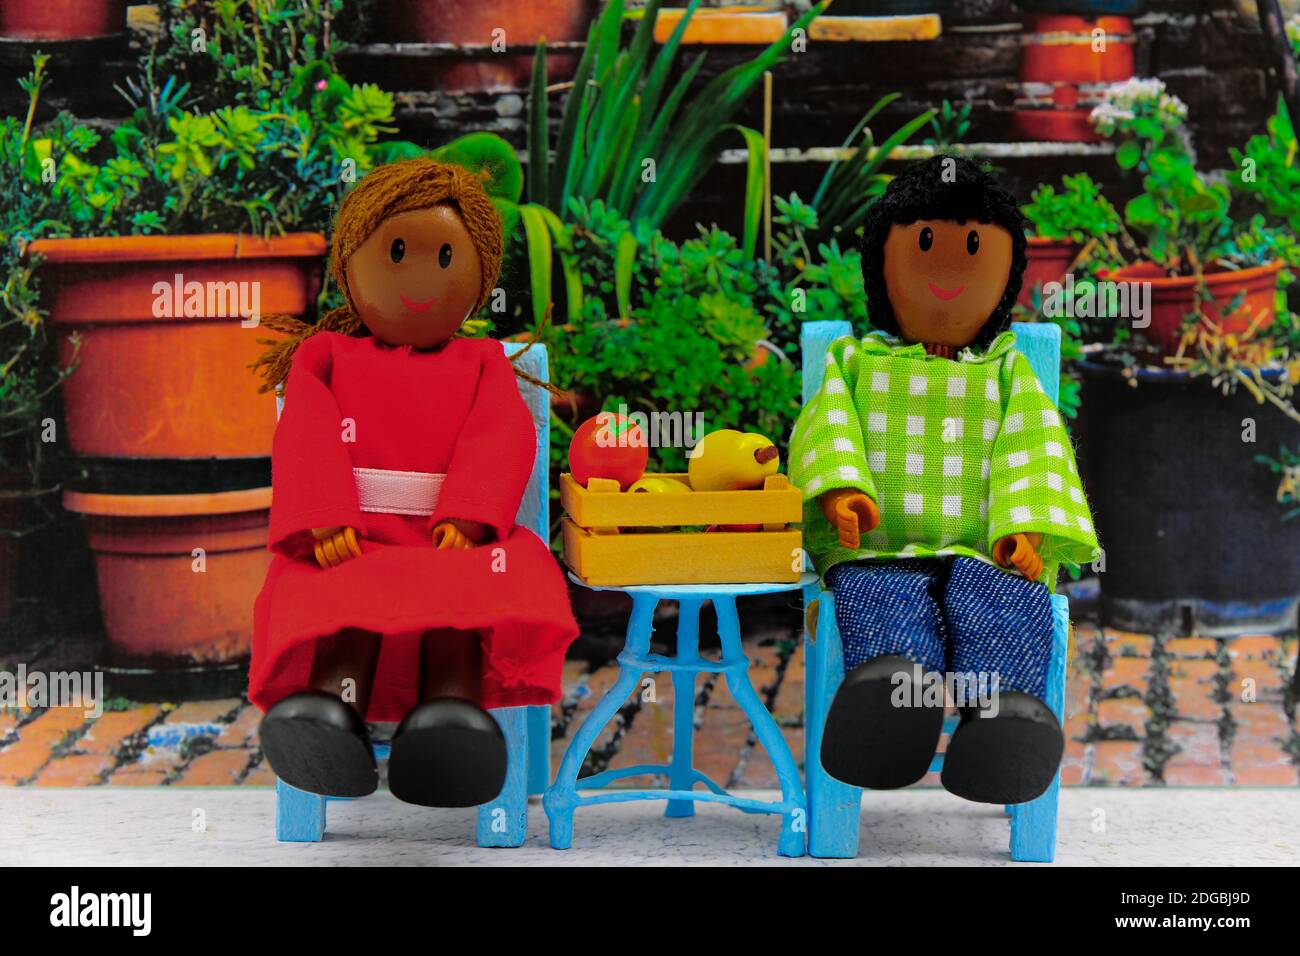 Young Couple sitting in Garden.  Garden Furniture and Wooden figurines / dolls. Stock Photo